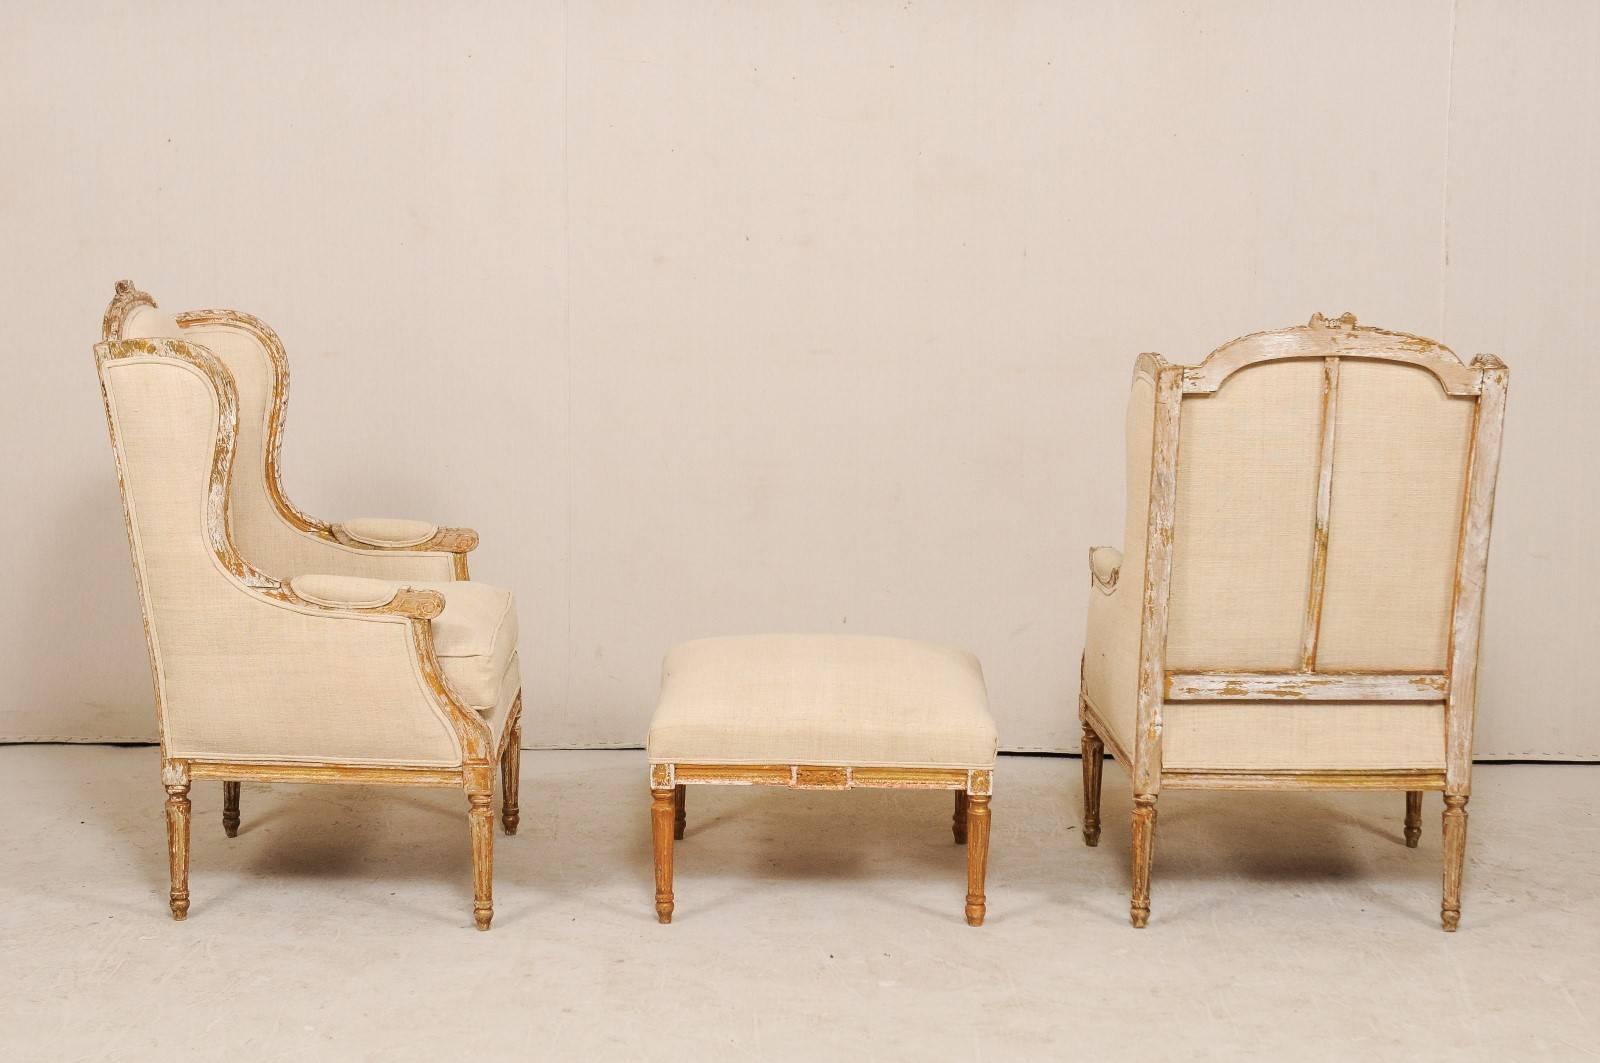 Pair of French Louis XVI Style Wood Wing-Back Bergère or Armchairs with Ottoman 1